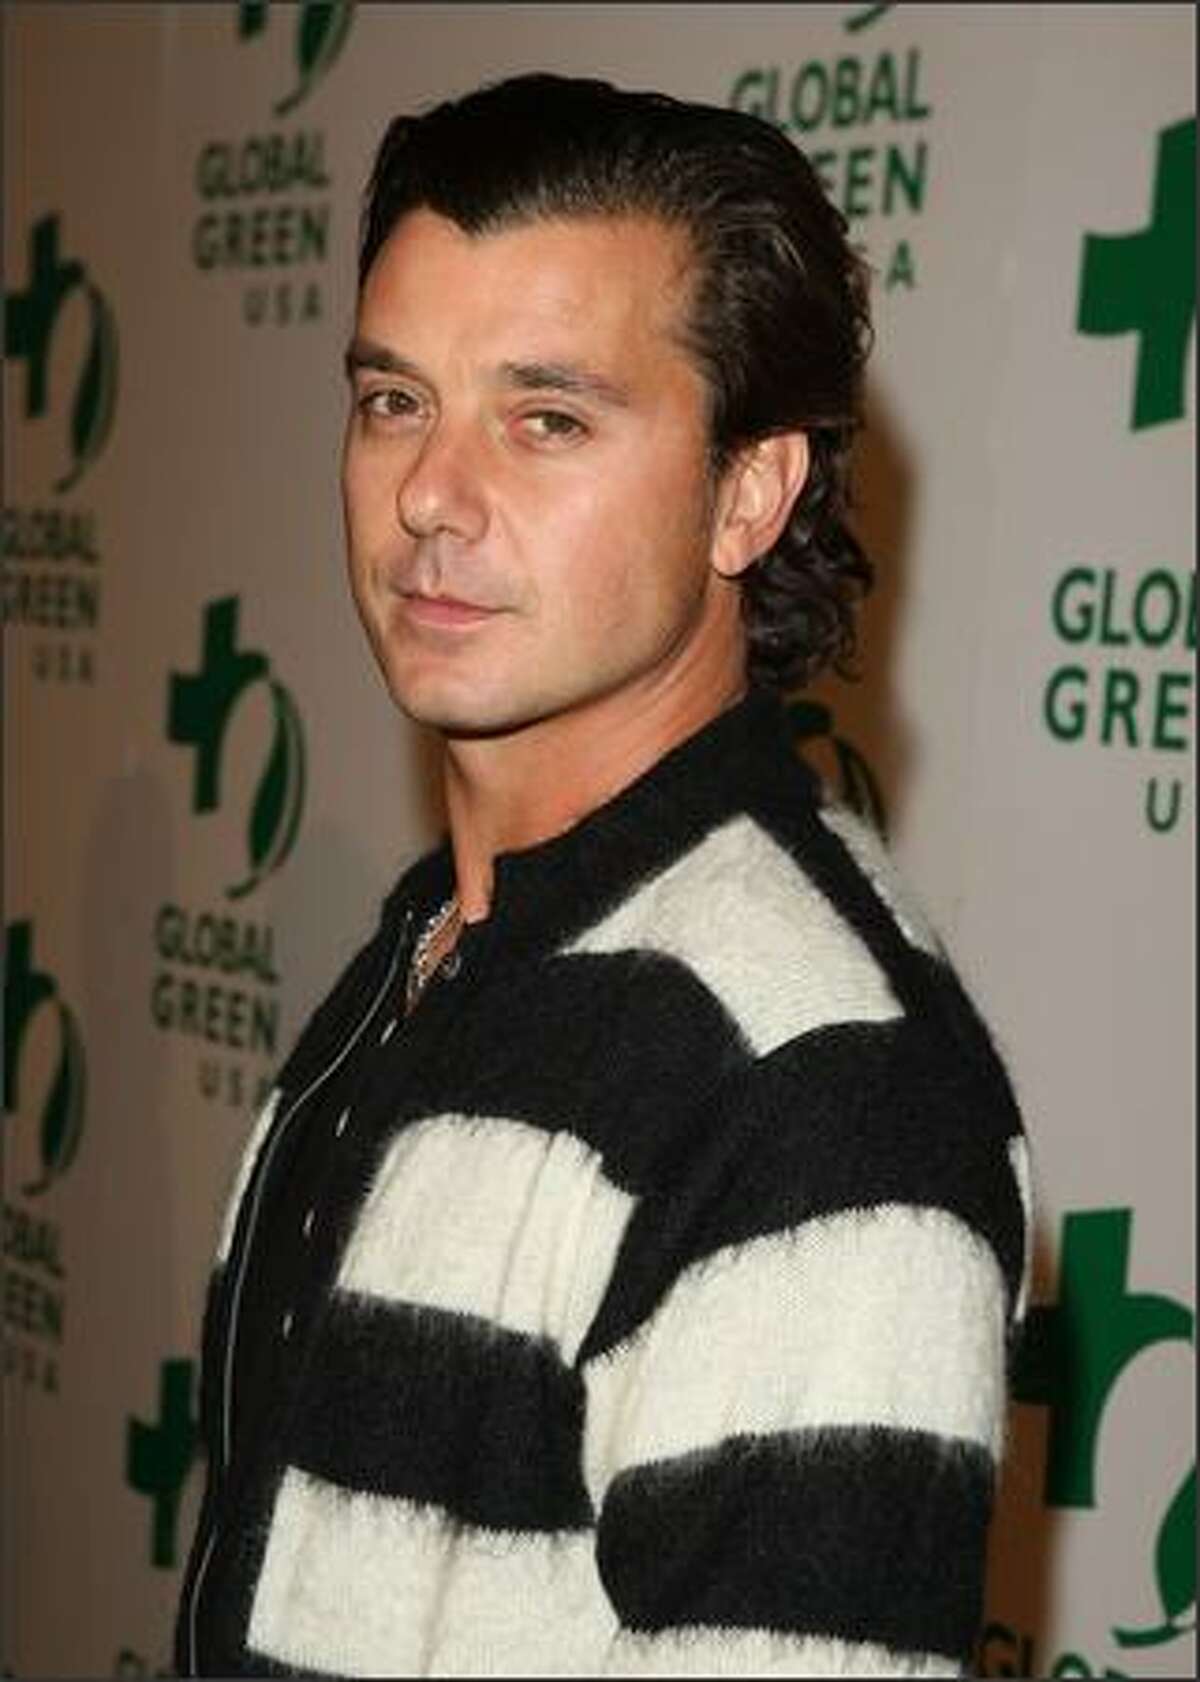 Musician Gavin Rossdale arrives at Global Green USA's 6th Annual Pre-Oscar Party held at Avalon Hollwood in Hollywood, California.